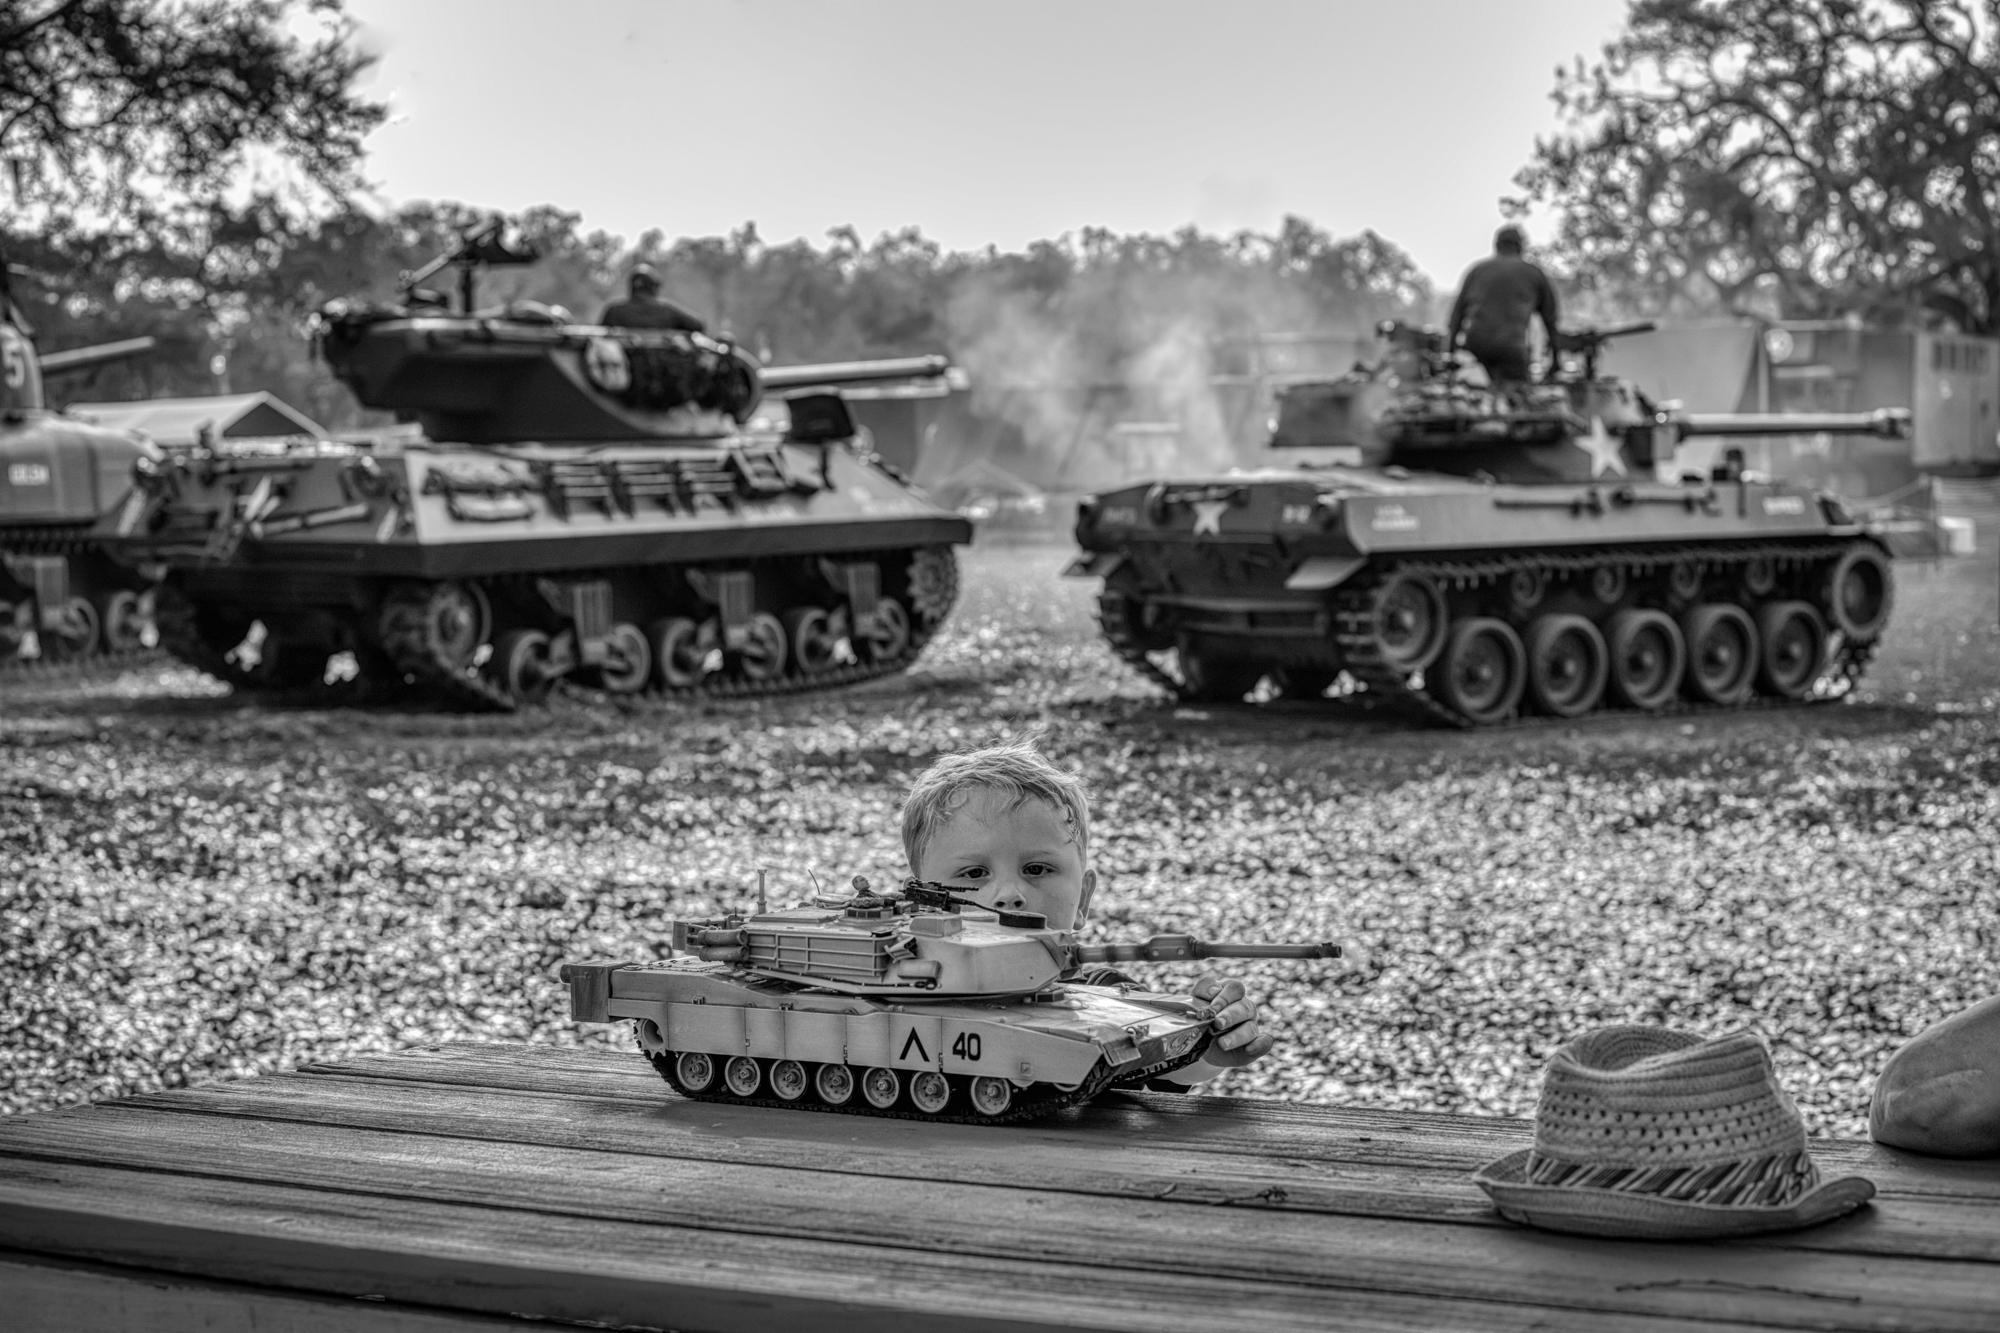 You're Now Beyond Hope -  Military Vehicle Show, Mount Dora, FL - 2018 